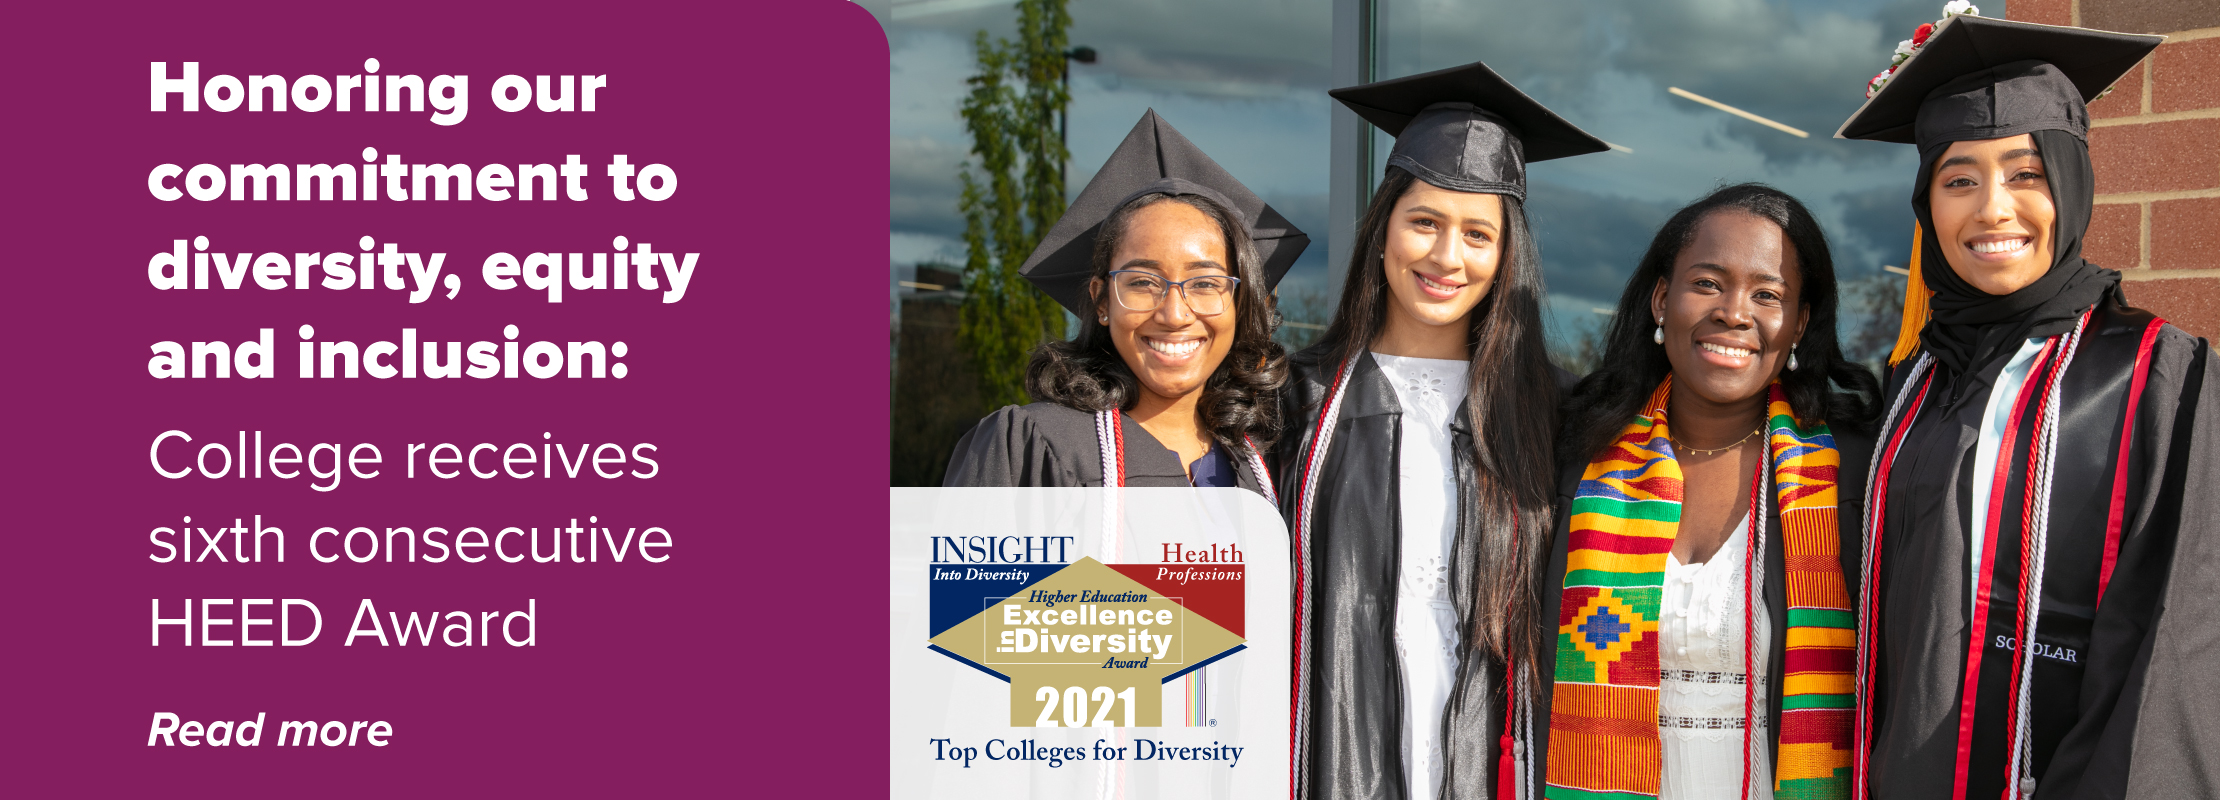 Honoring our commitment to diversity, equity and inclusion: College receives sixth consecutive HEED Award